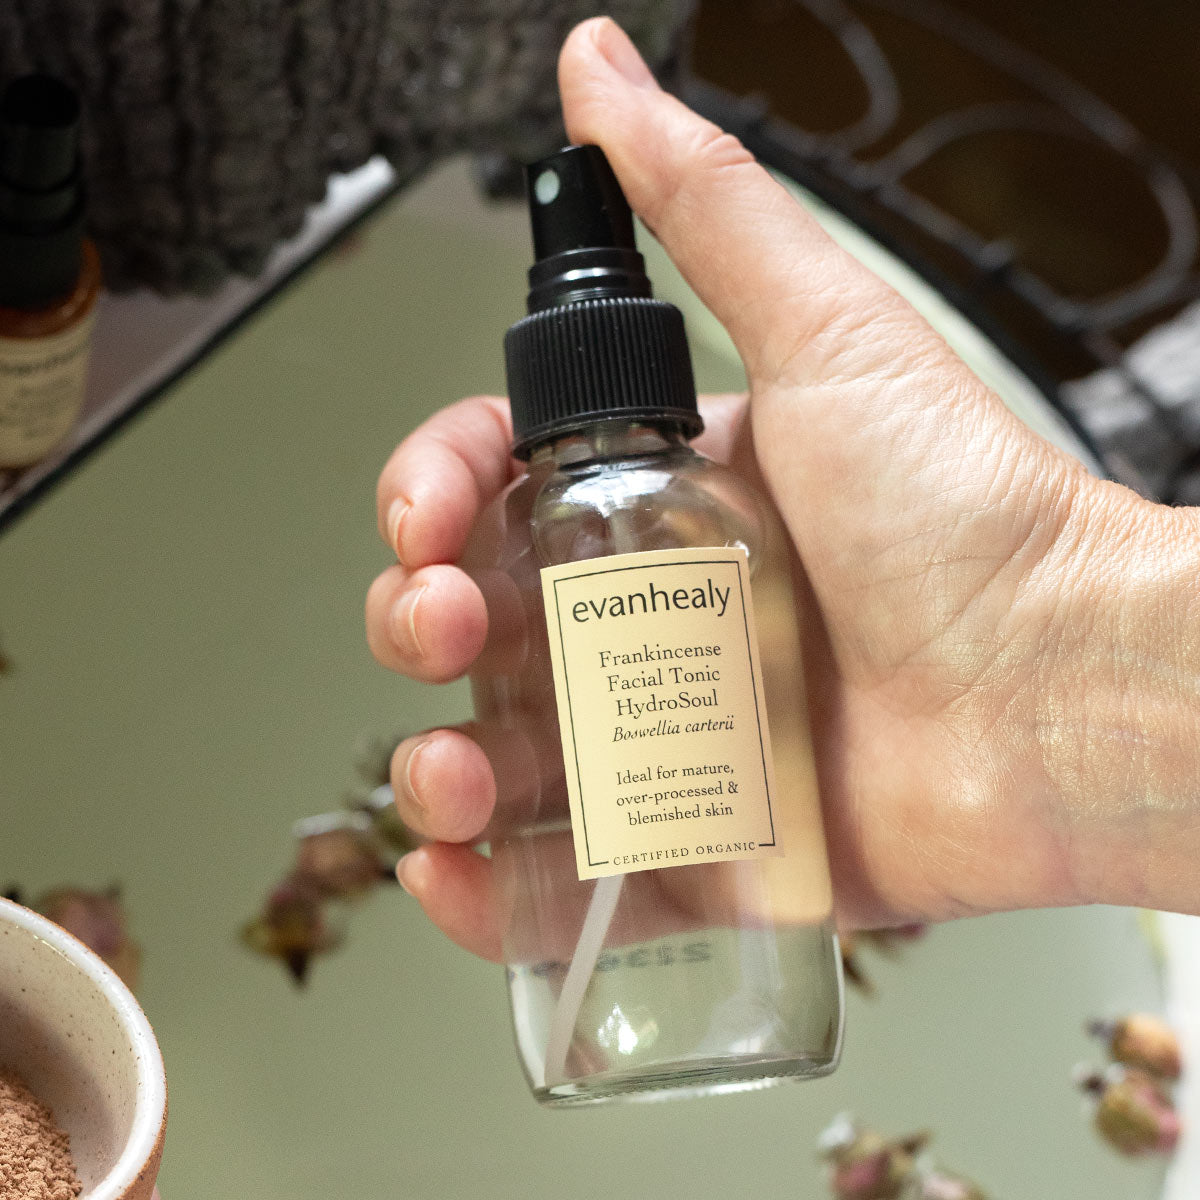 evanhealy frankincense facial tonic hydrosol in hand with thumb on pump